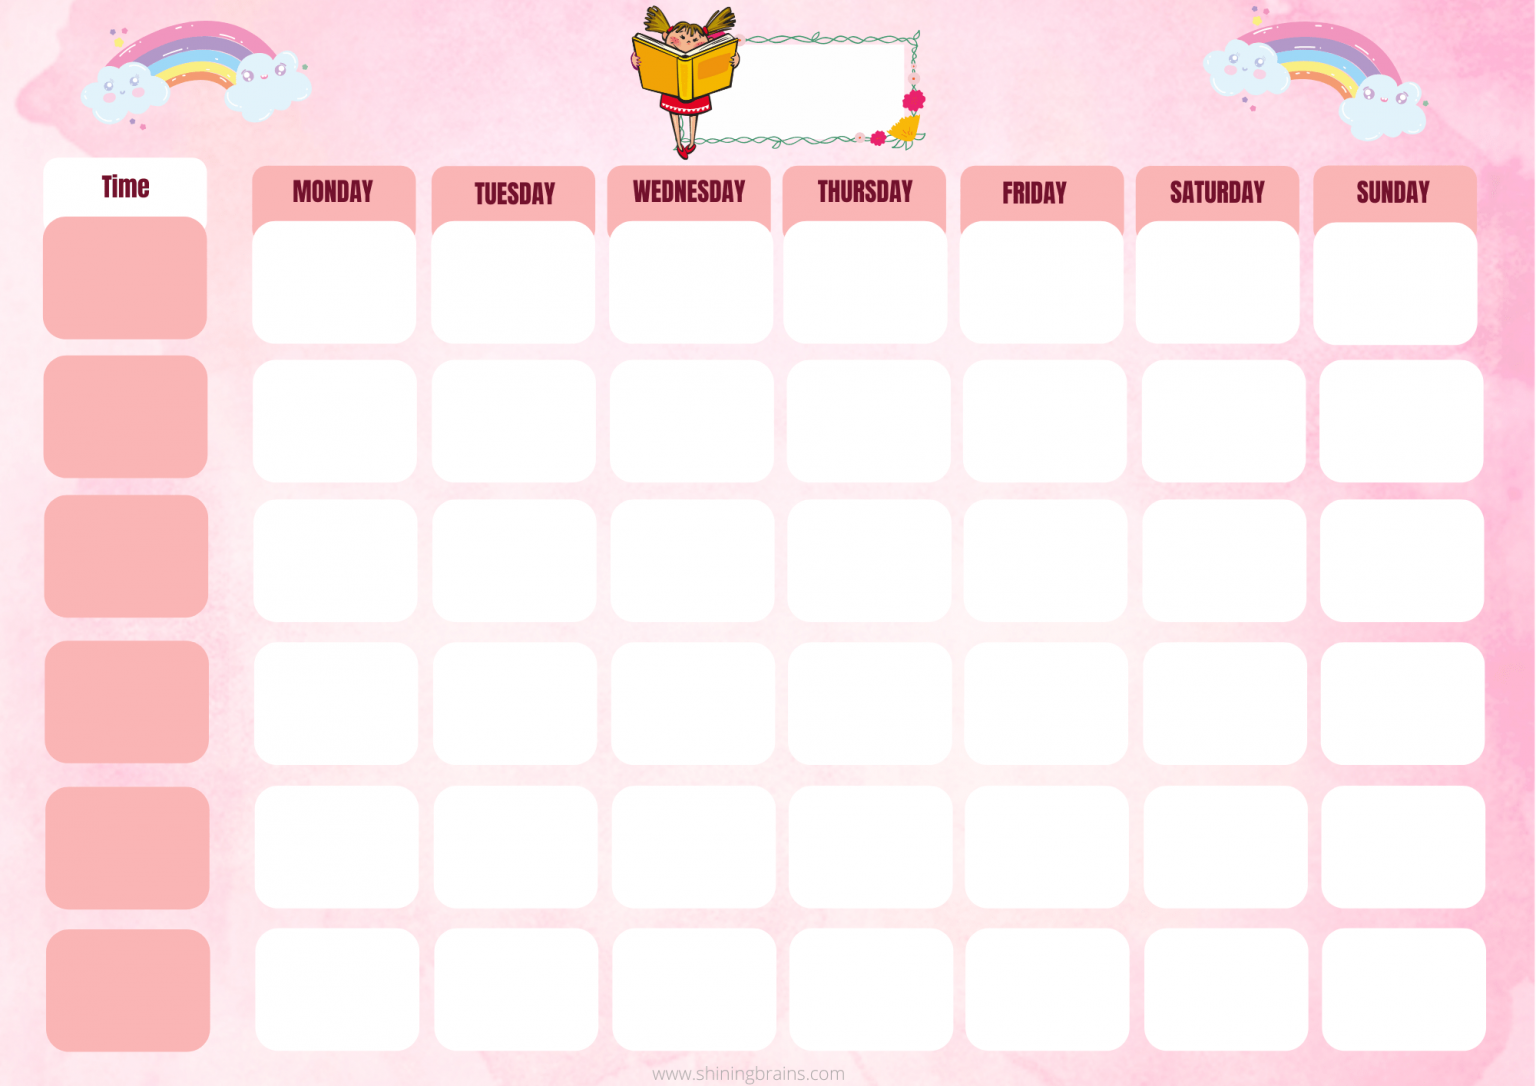 Weekly Planner Daily Planner Template Free Printable Shining Brains